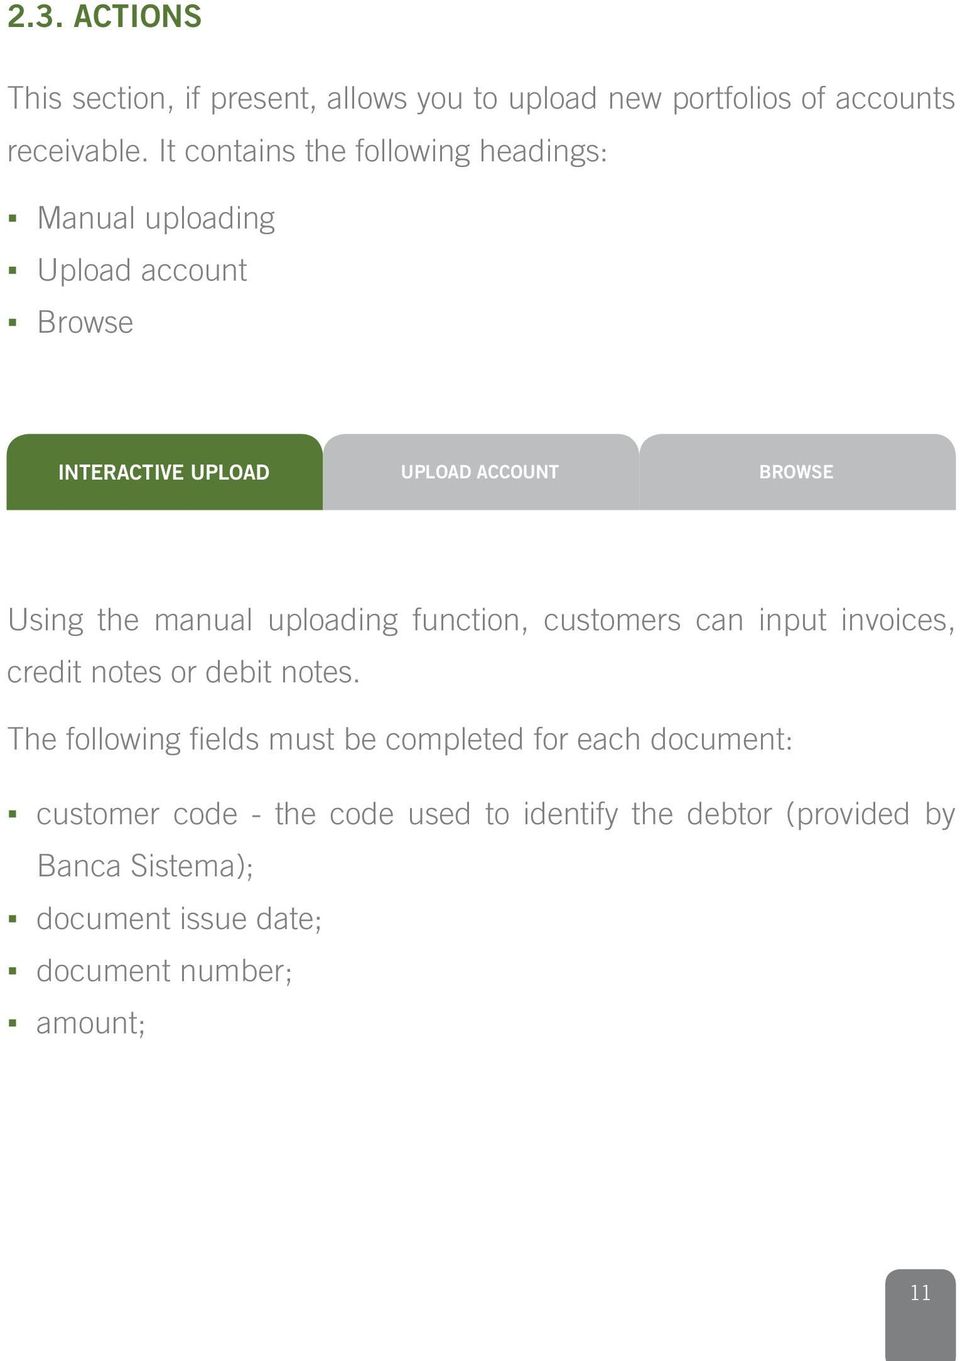 the manual uploading function, customers can input invoices, credit notes or debit notes.